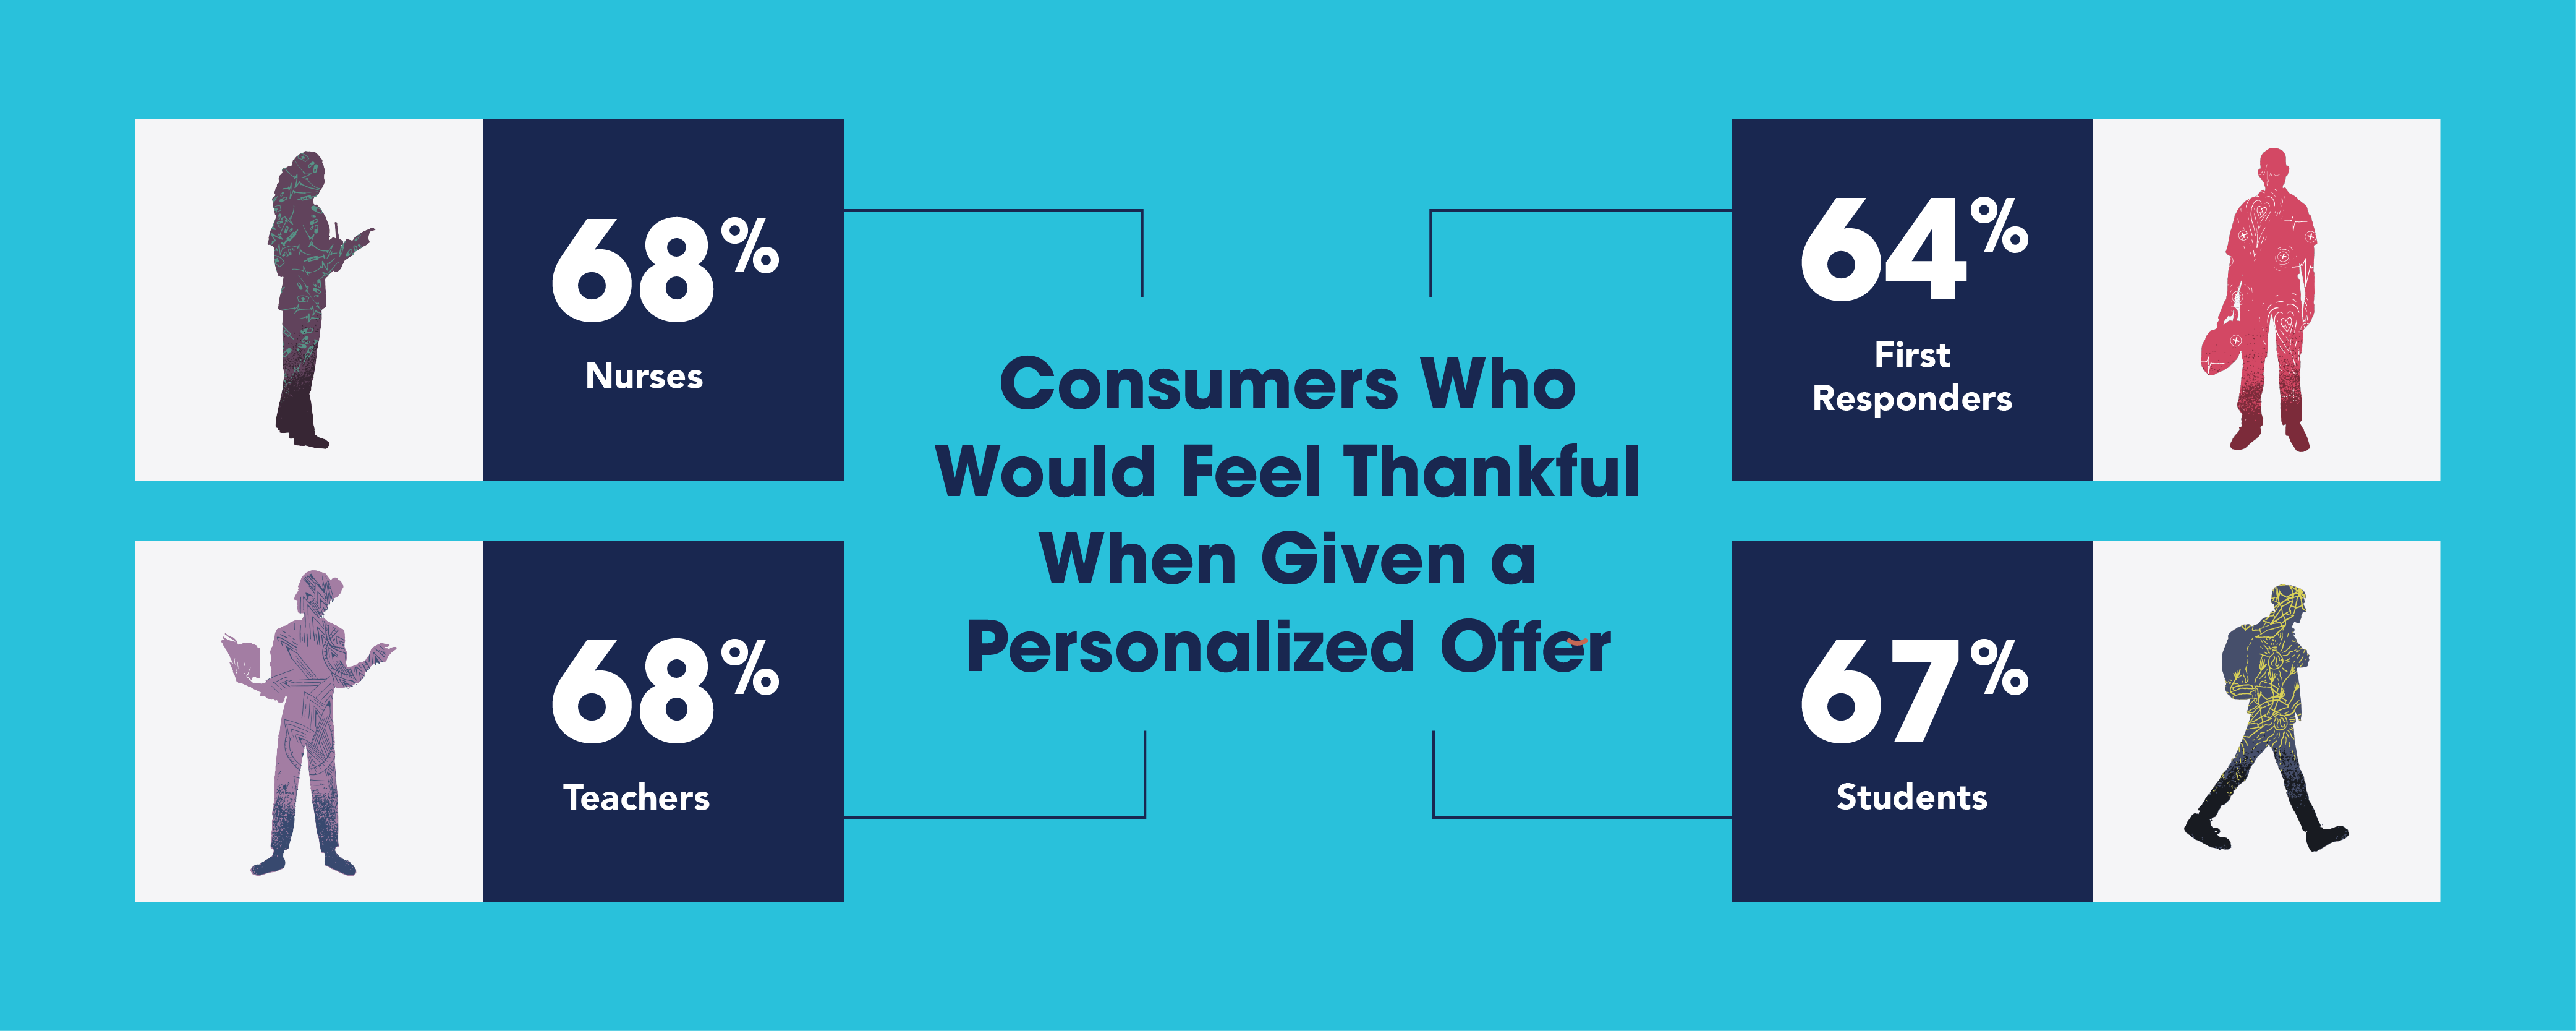 Consumers Who Would Feel Thankful When Given a Personalized Offer: Nurses - 68% Teachers - 68% First Responders - 64% College Students - 67%